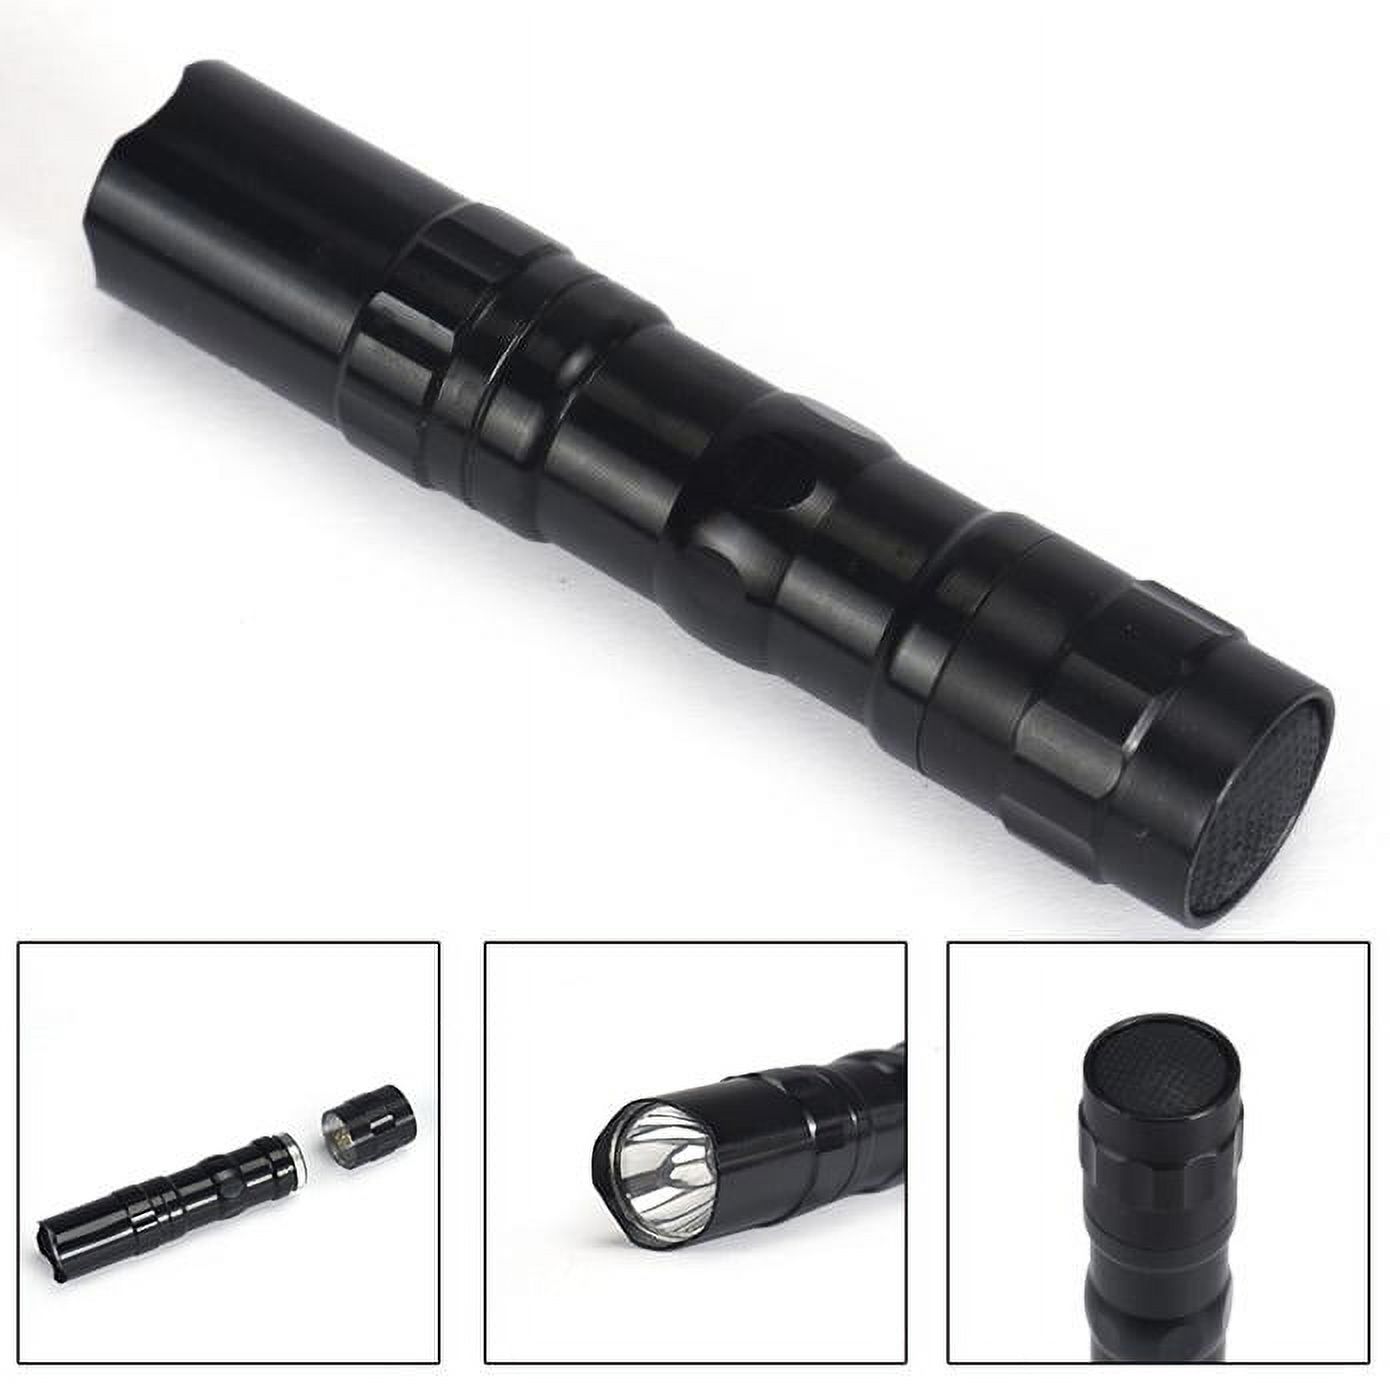 3W Super Bright LED  Clamp AA Flashlight Focus Torch Light - image 2 of 5